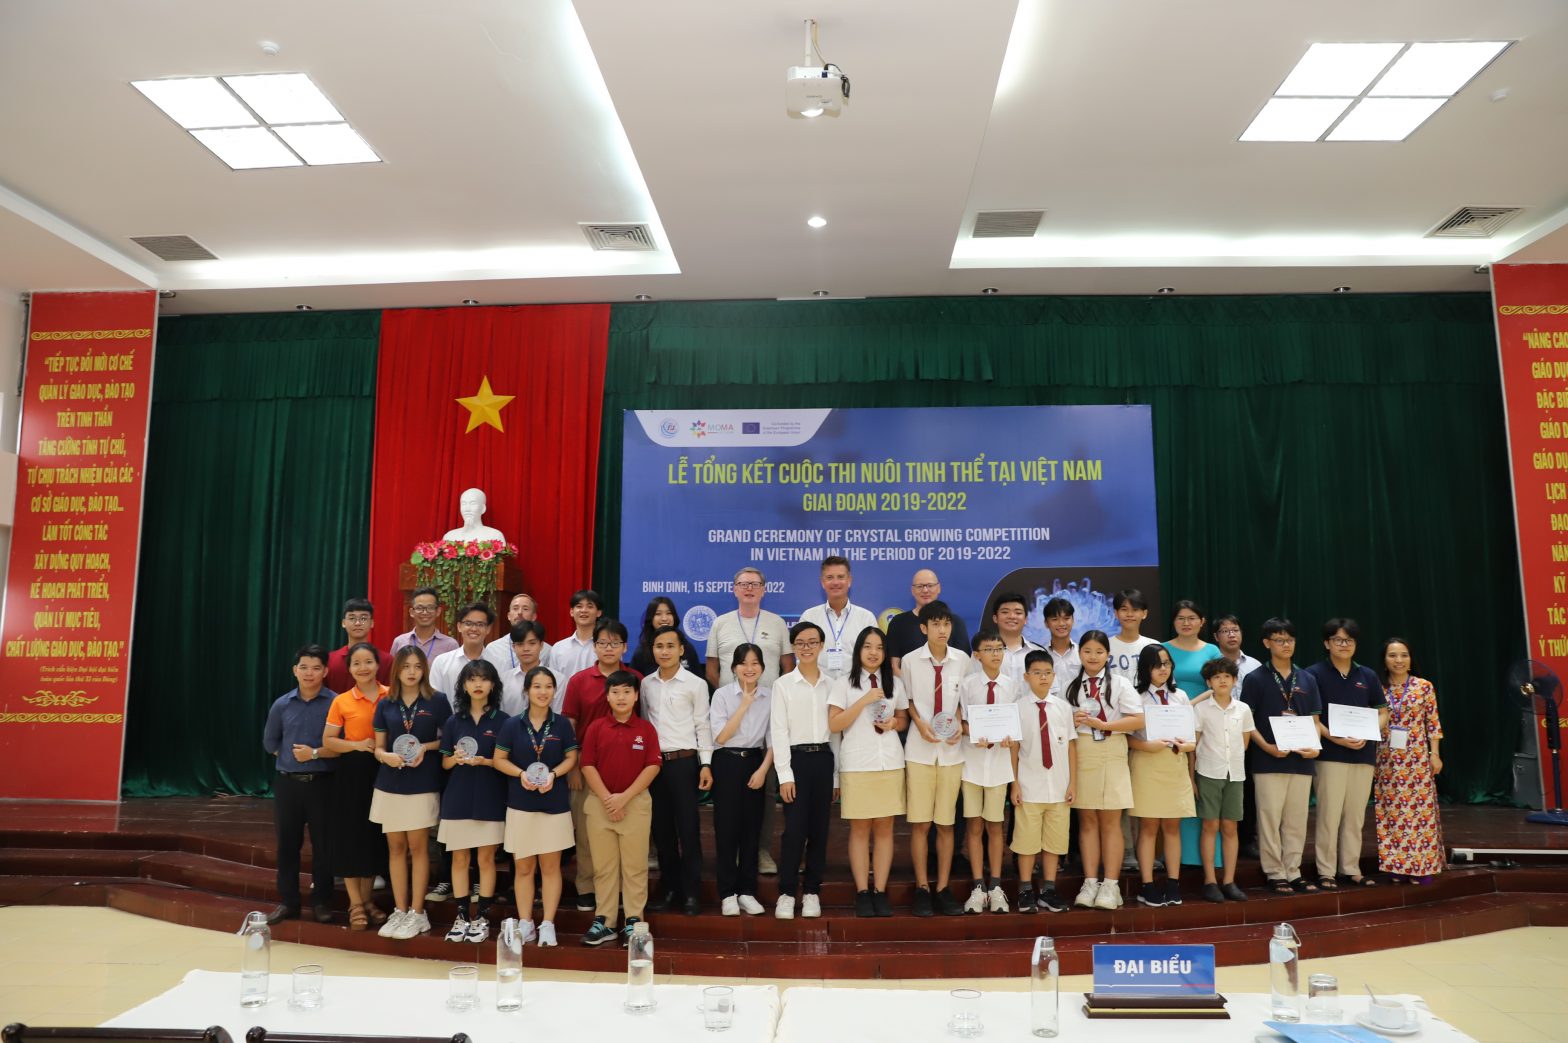 GRAND CEREMONY OF CRYSTAL GROWING COMPETITION IN VIETNAM (V-CGC) IN THE PERIOD OF 2019-2022 ON 15 SEPTEMBER 2022 AT QUY NHON UNIVERSITY